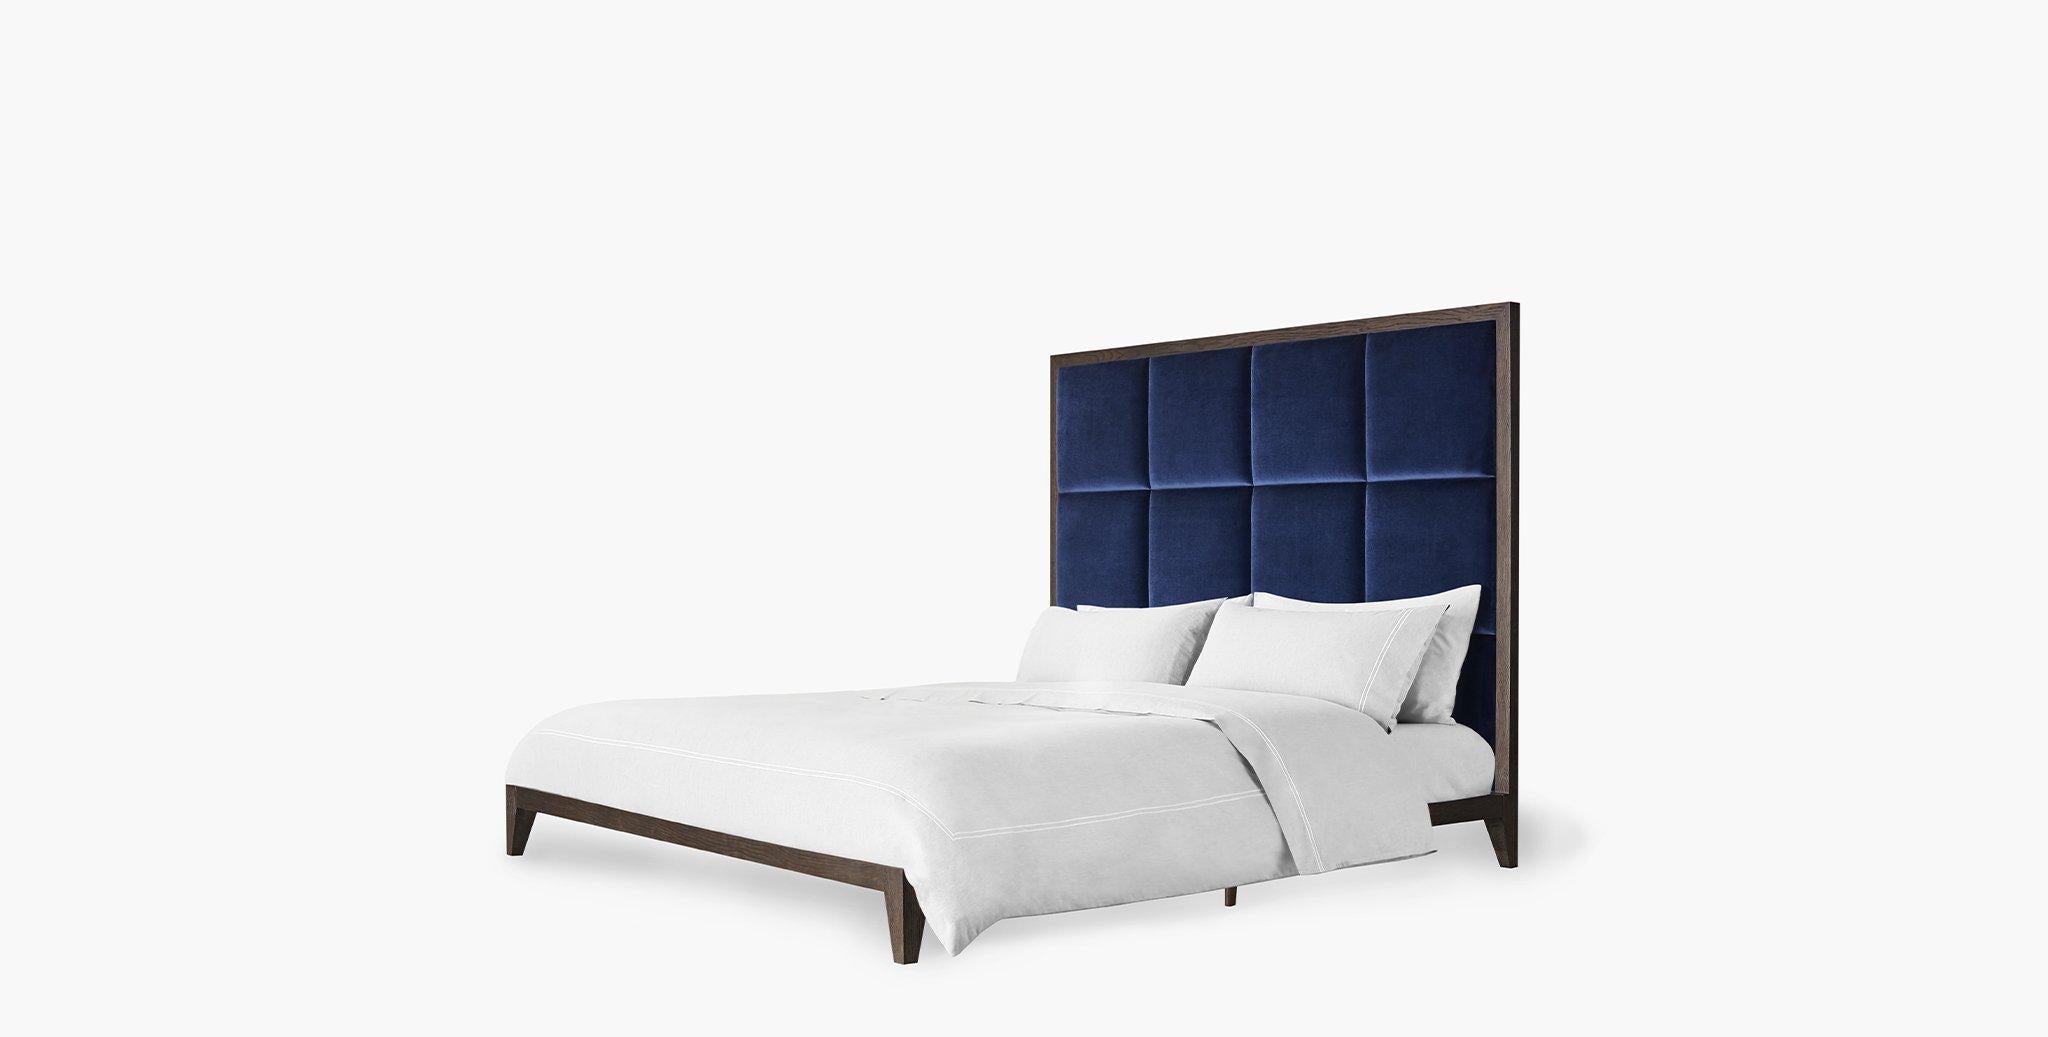 Exquisitely crafted with a tufted panel headboard perched on a dark walnut low-profile platform base, the Ridley bed is a refined anchor for a tailored retreat. Size: Queen. Upholstered with velvet sapphire fabric.
 